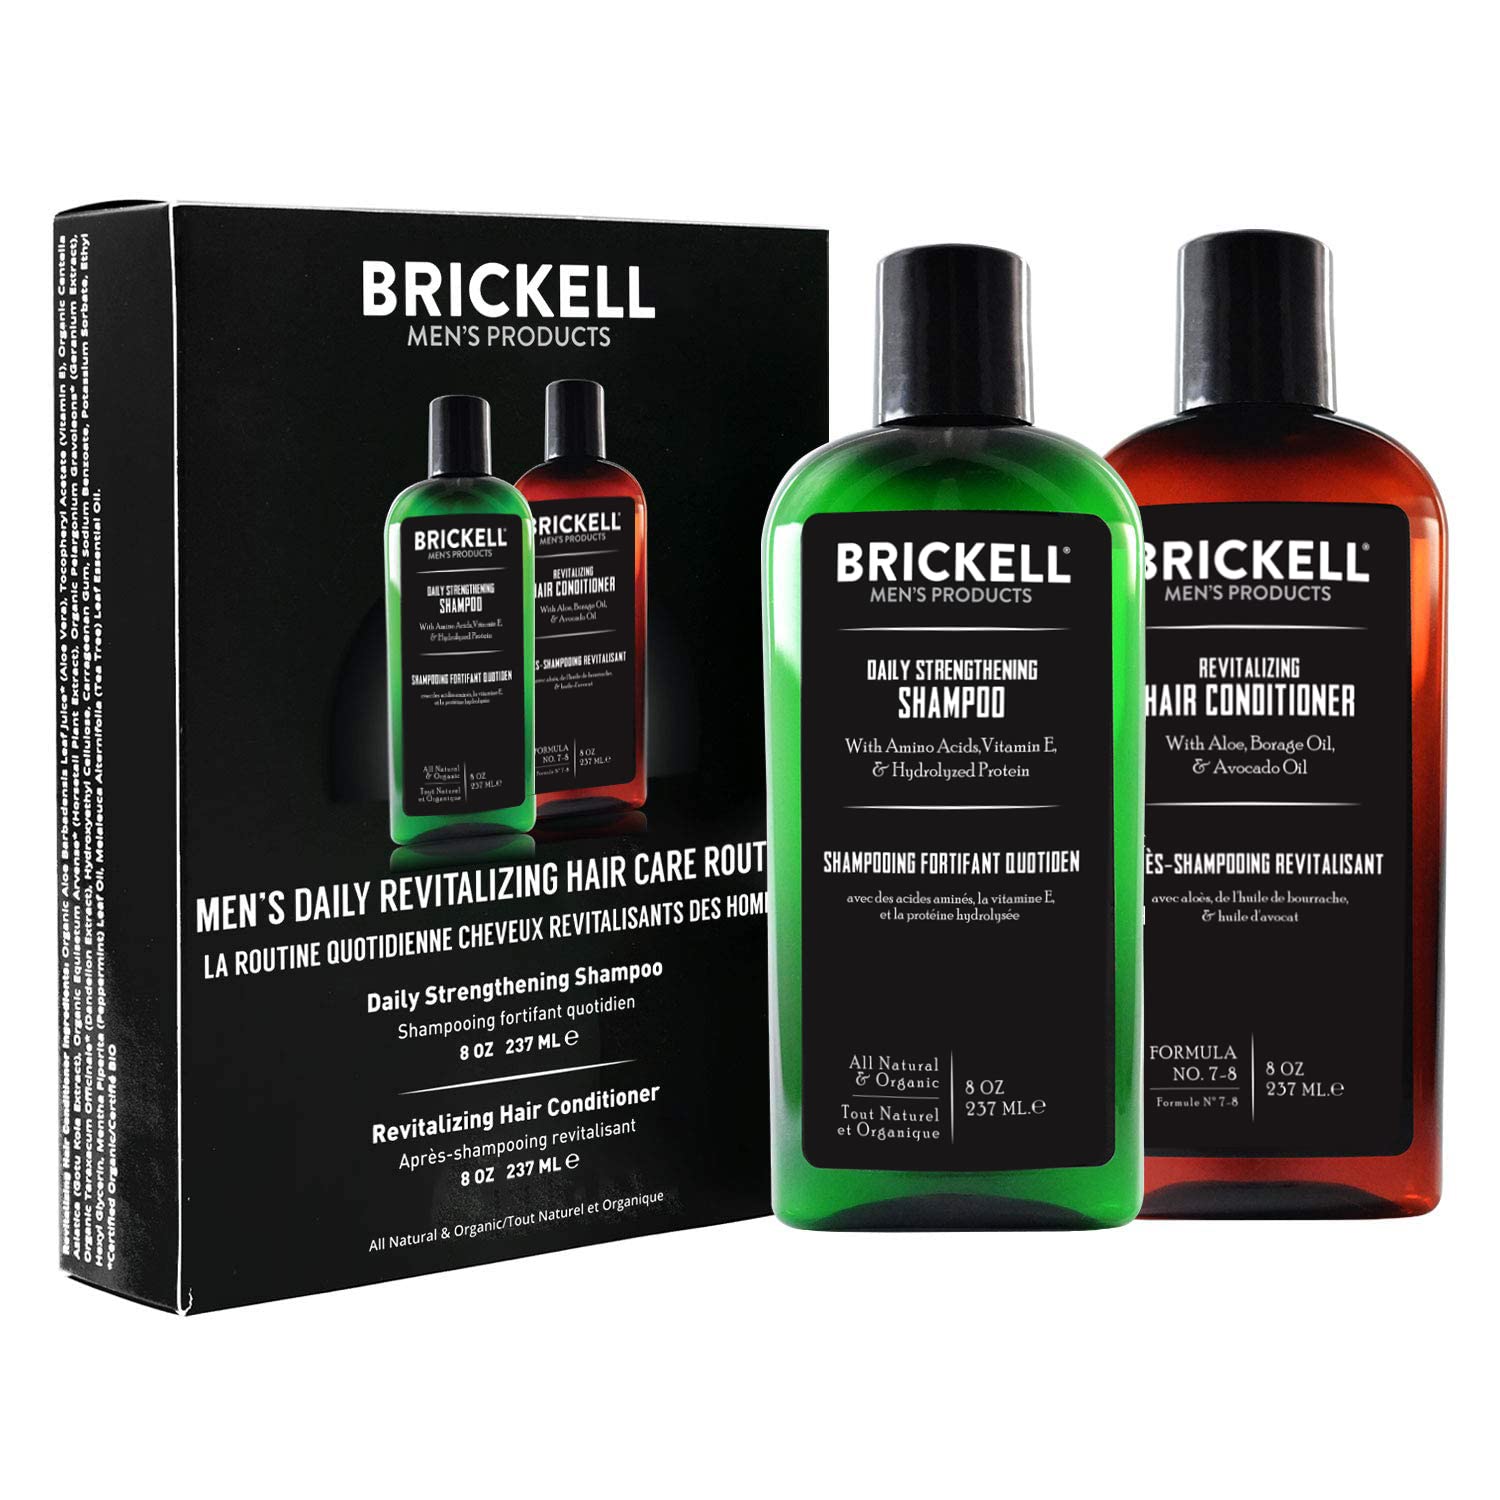 Mua Brickell Men's Daily Revitalizing Hair Care Routine, Shampoo and  Conditioner Set For Men, Mint and Tea Tree Oil Shampoo, Strength and Volume  Enhancing Conditioner, Natural and Organic, Gift Set trên Amazon